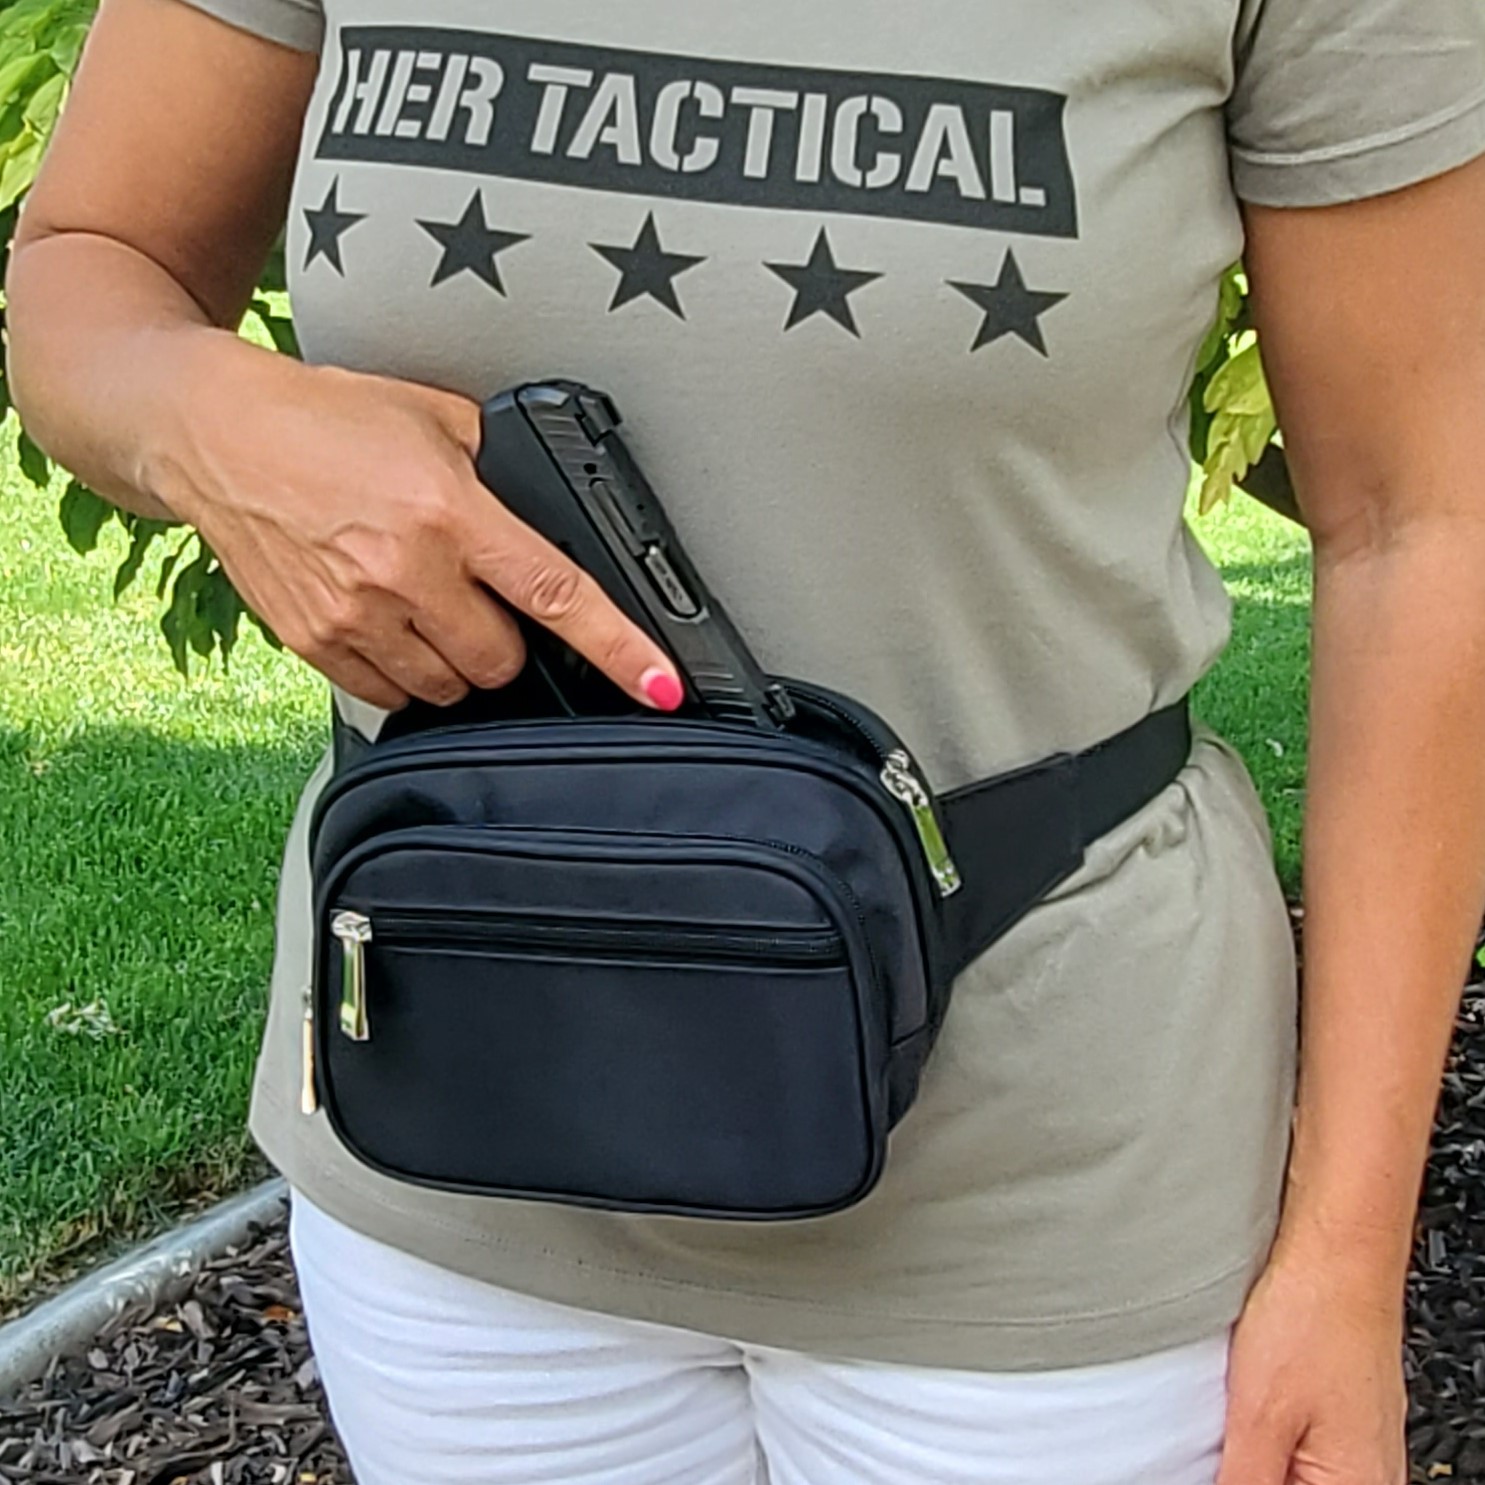 HER TACTICAL Concealed Carry Fanny Pack For Compact Gun ...